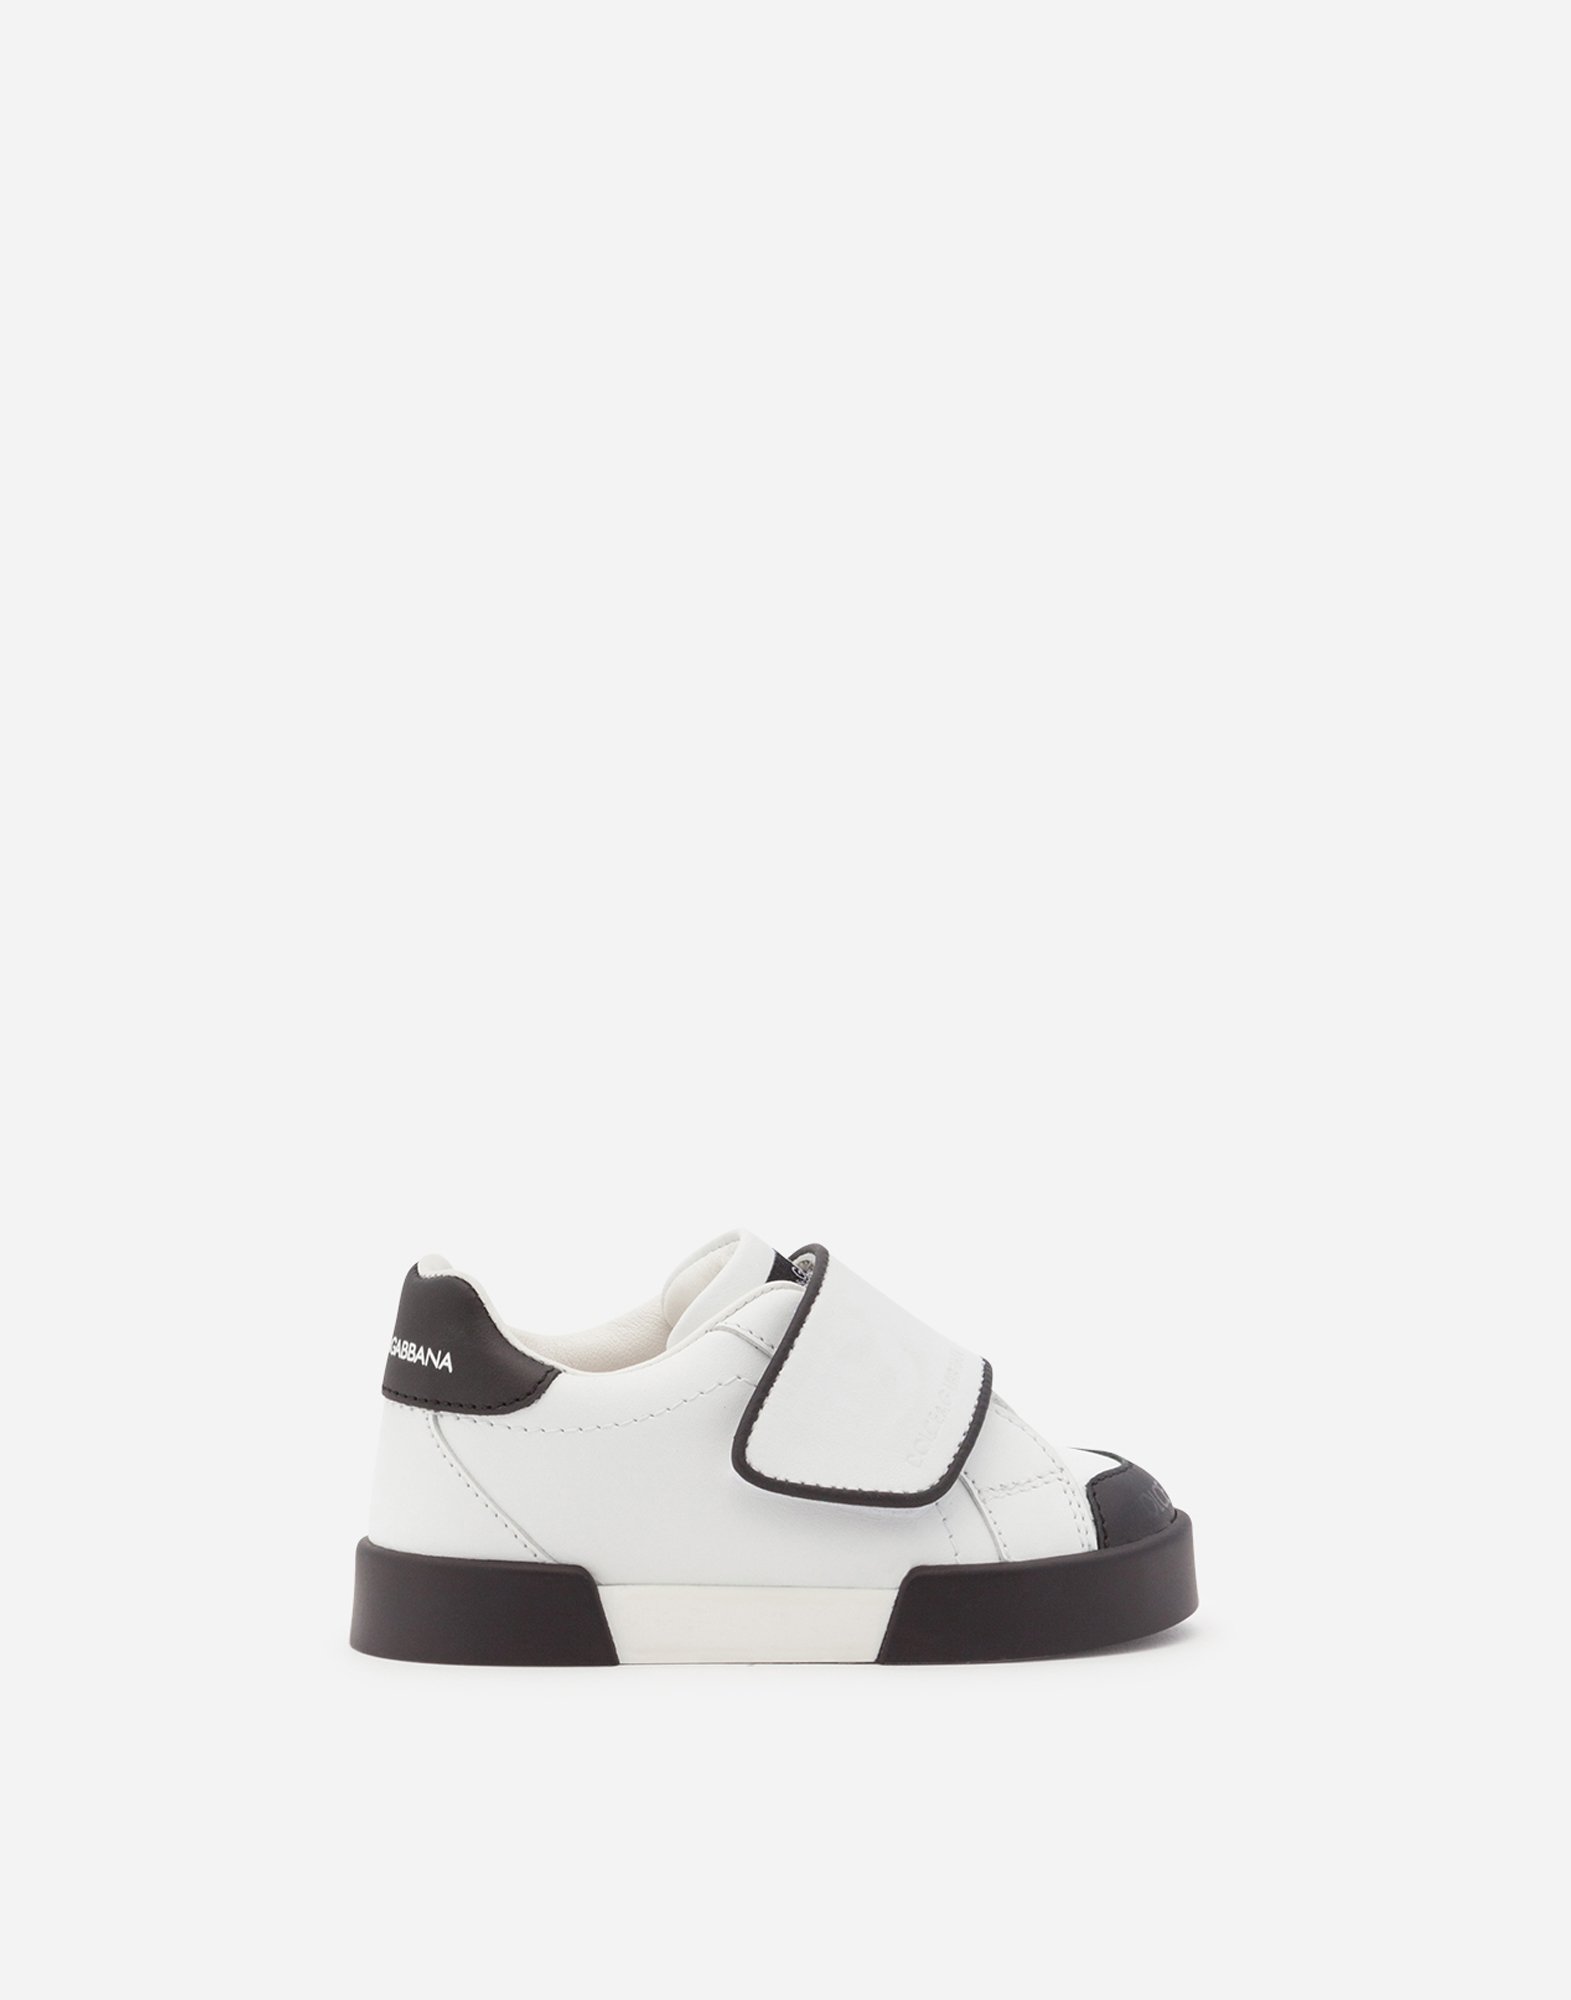 Dolce & Gabbana Babies'  Shoes For First Steps (19-26) - Portofino Light Sneakers With Dg Logo And Hook-and-l In White/black